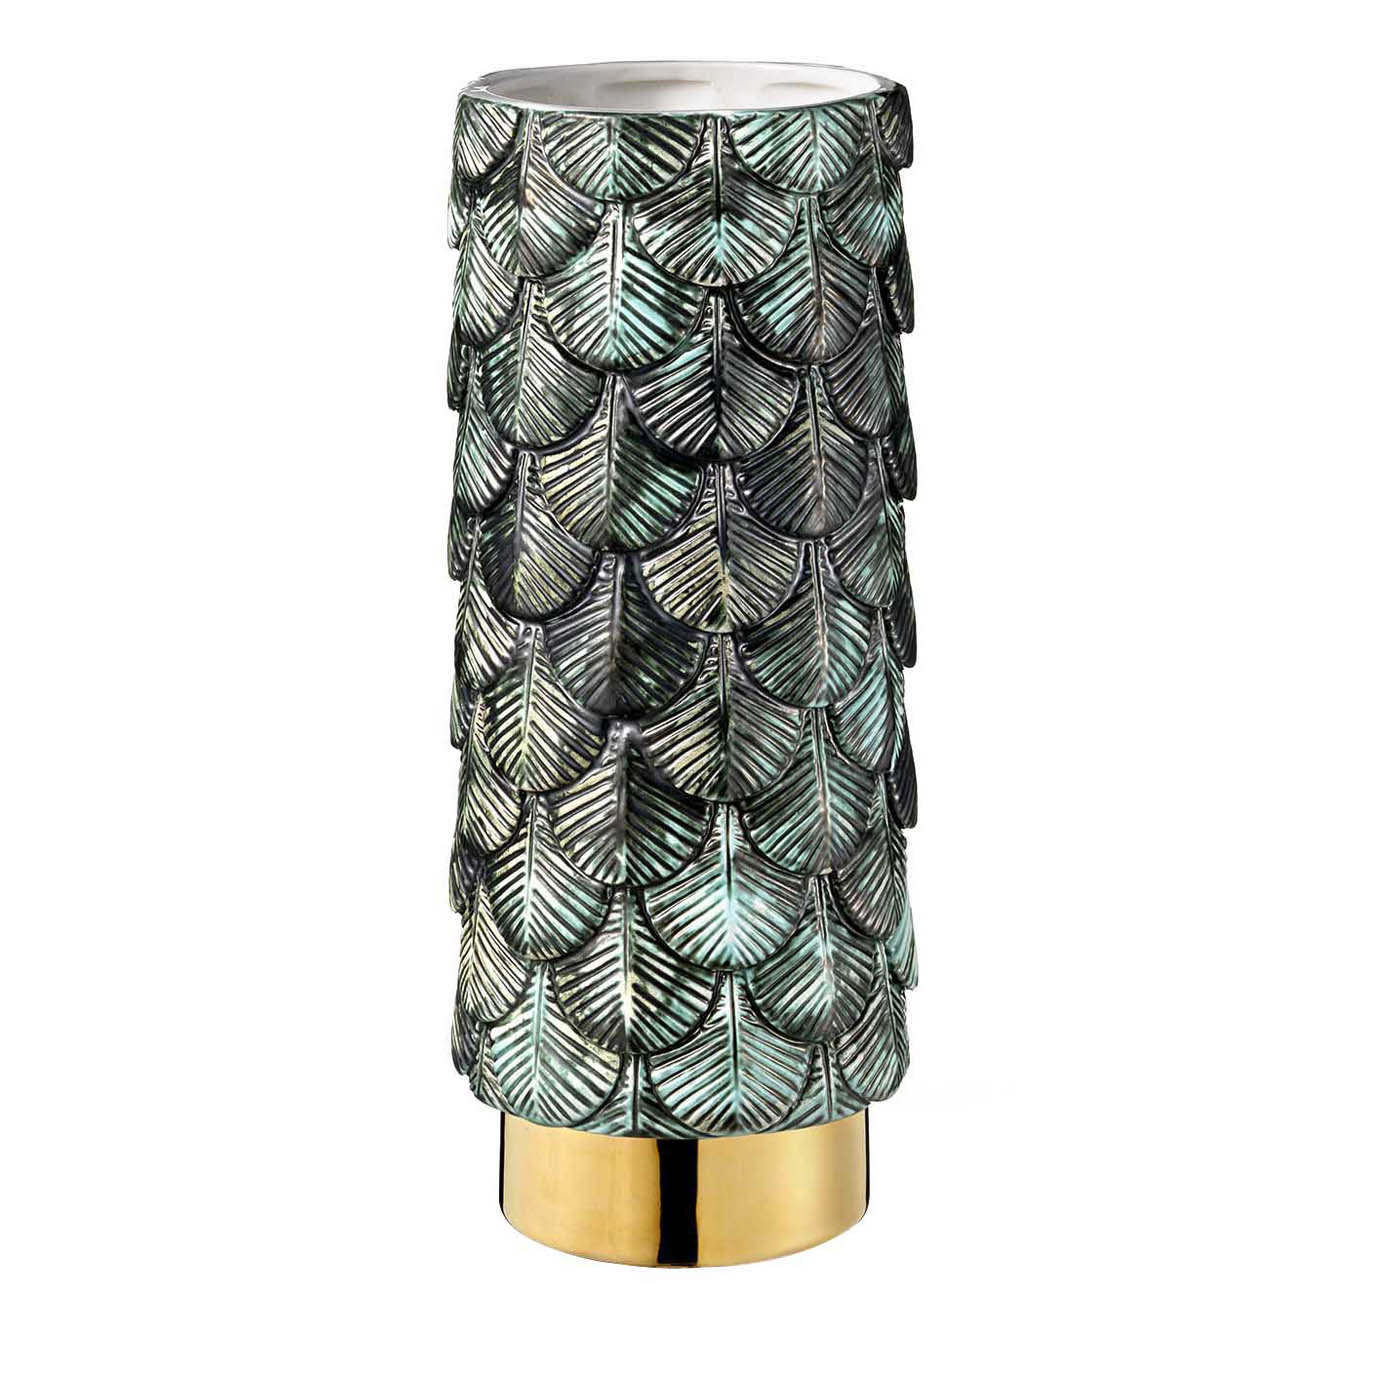 Green and Silver Plumage Vase with 24K Gold - Botteganove